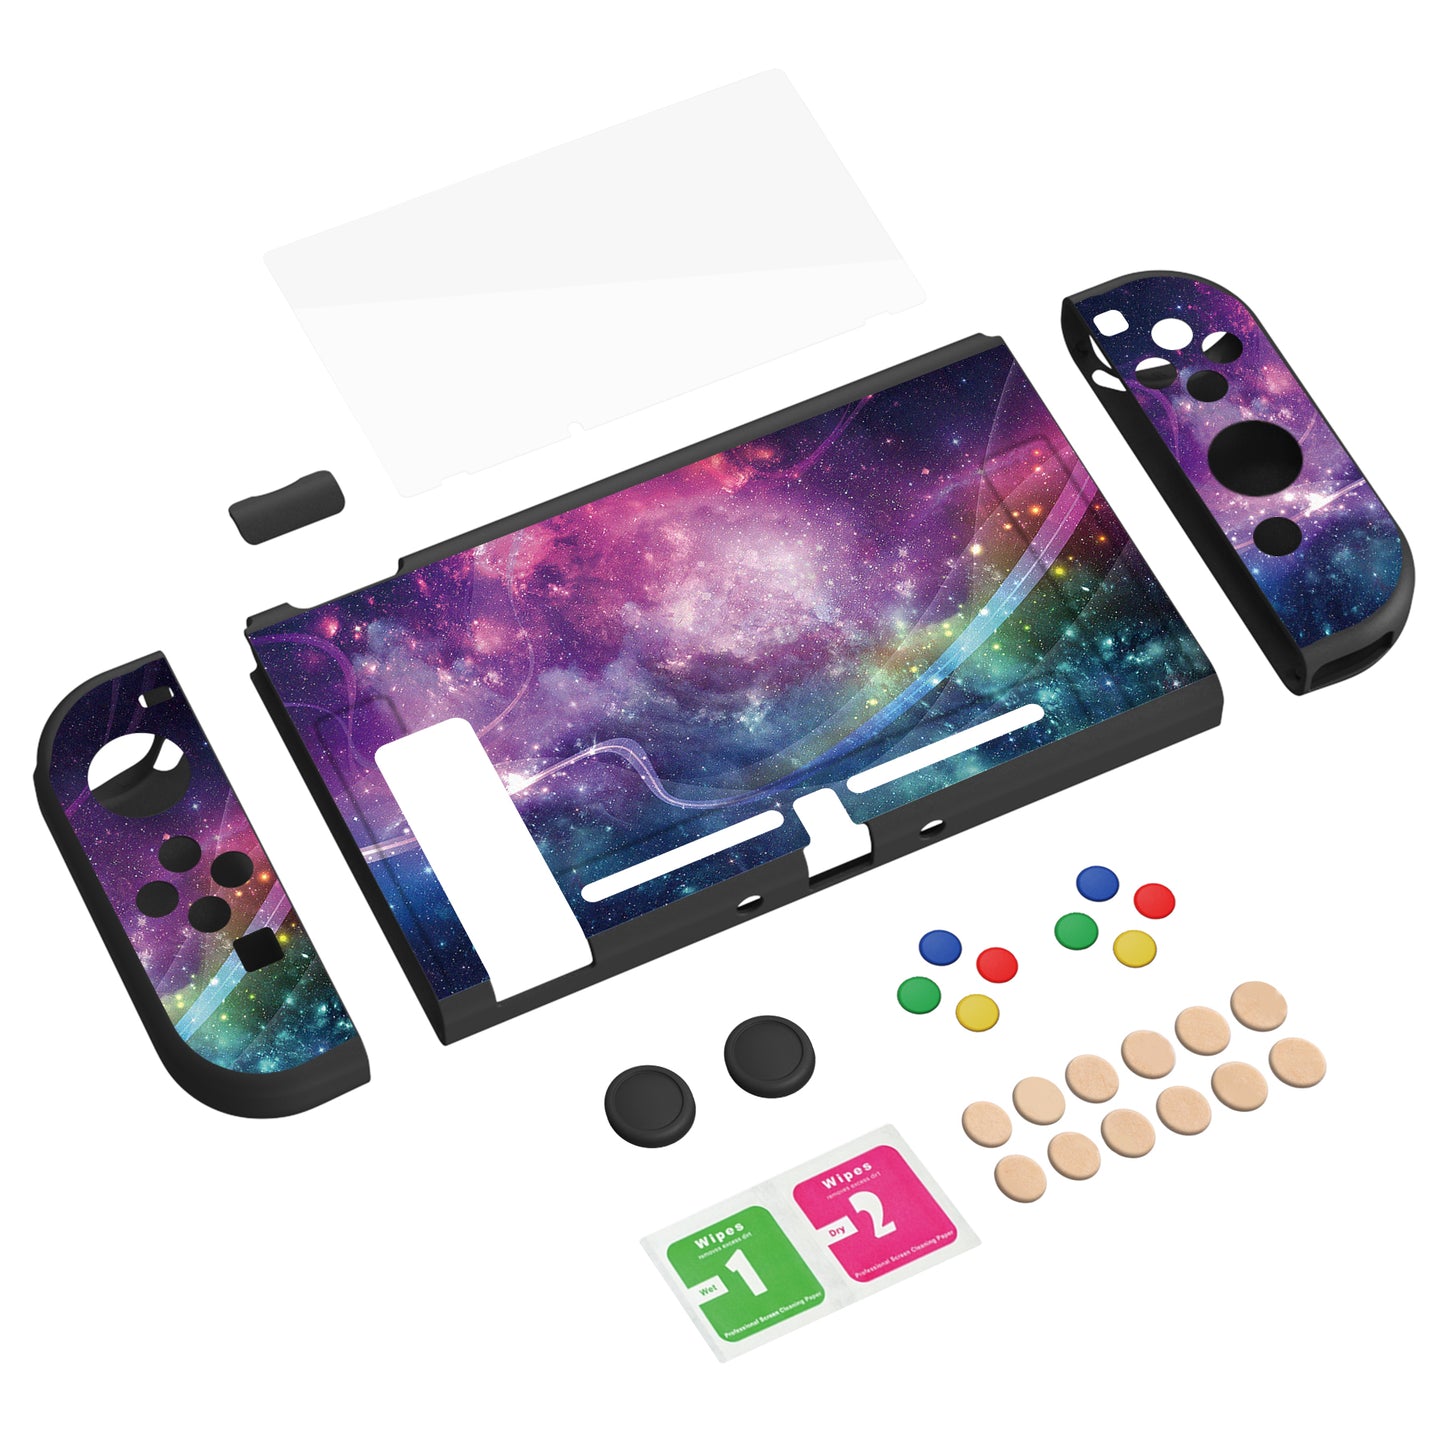 PlayVital ZealProtect Soft TPU Slim Protective Case with Tempered Glass Screen Protector & Thumb Grips & ABXY Direction Button Caps for NS Switch - Purple Galaxy - RNSYV6001 playvital